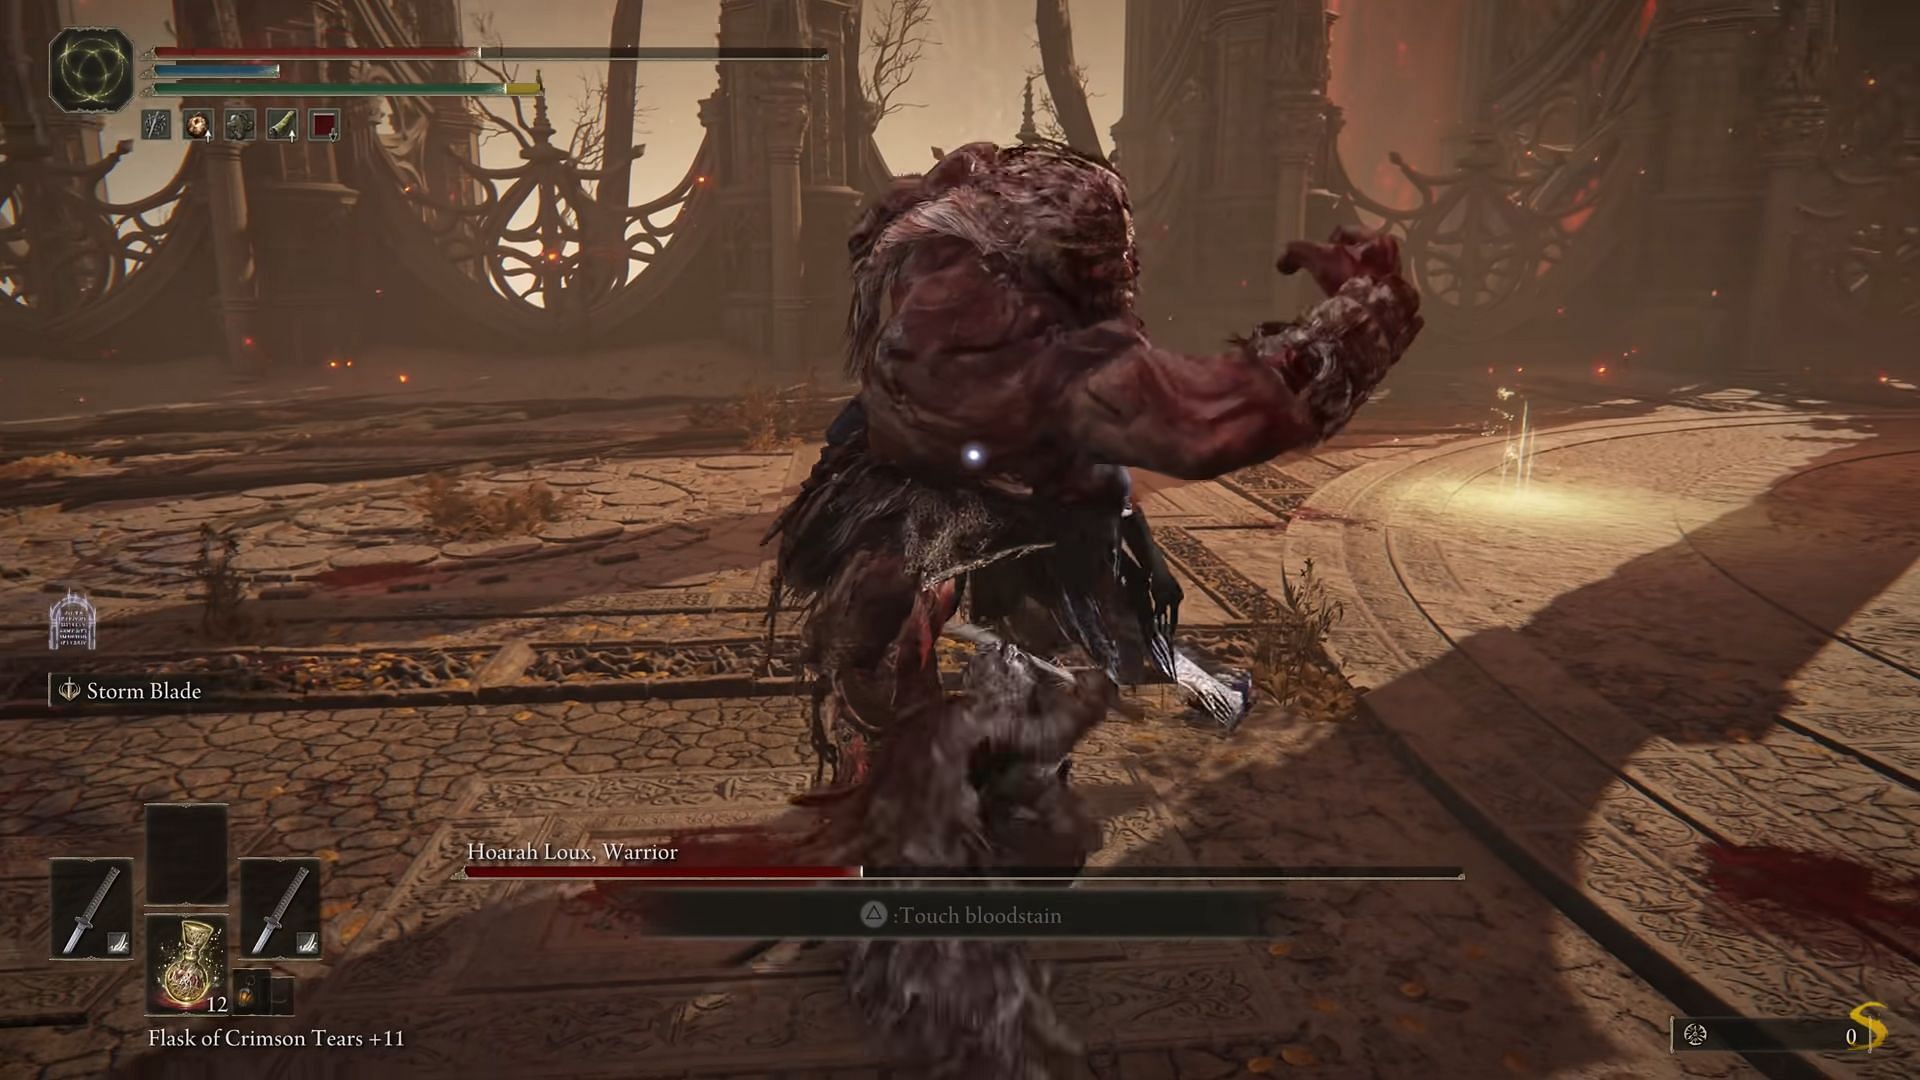 The fight against Godfrey/Hoarah Loux is going to make players sweat in Elden Ring (Image via Shirrako/Youtube)